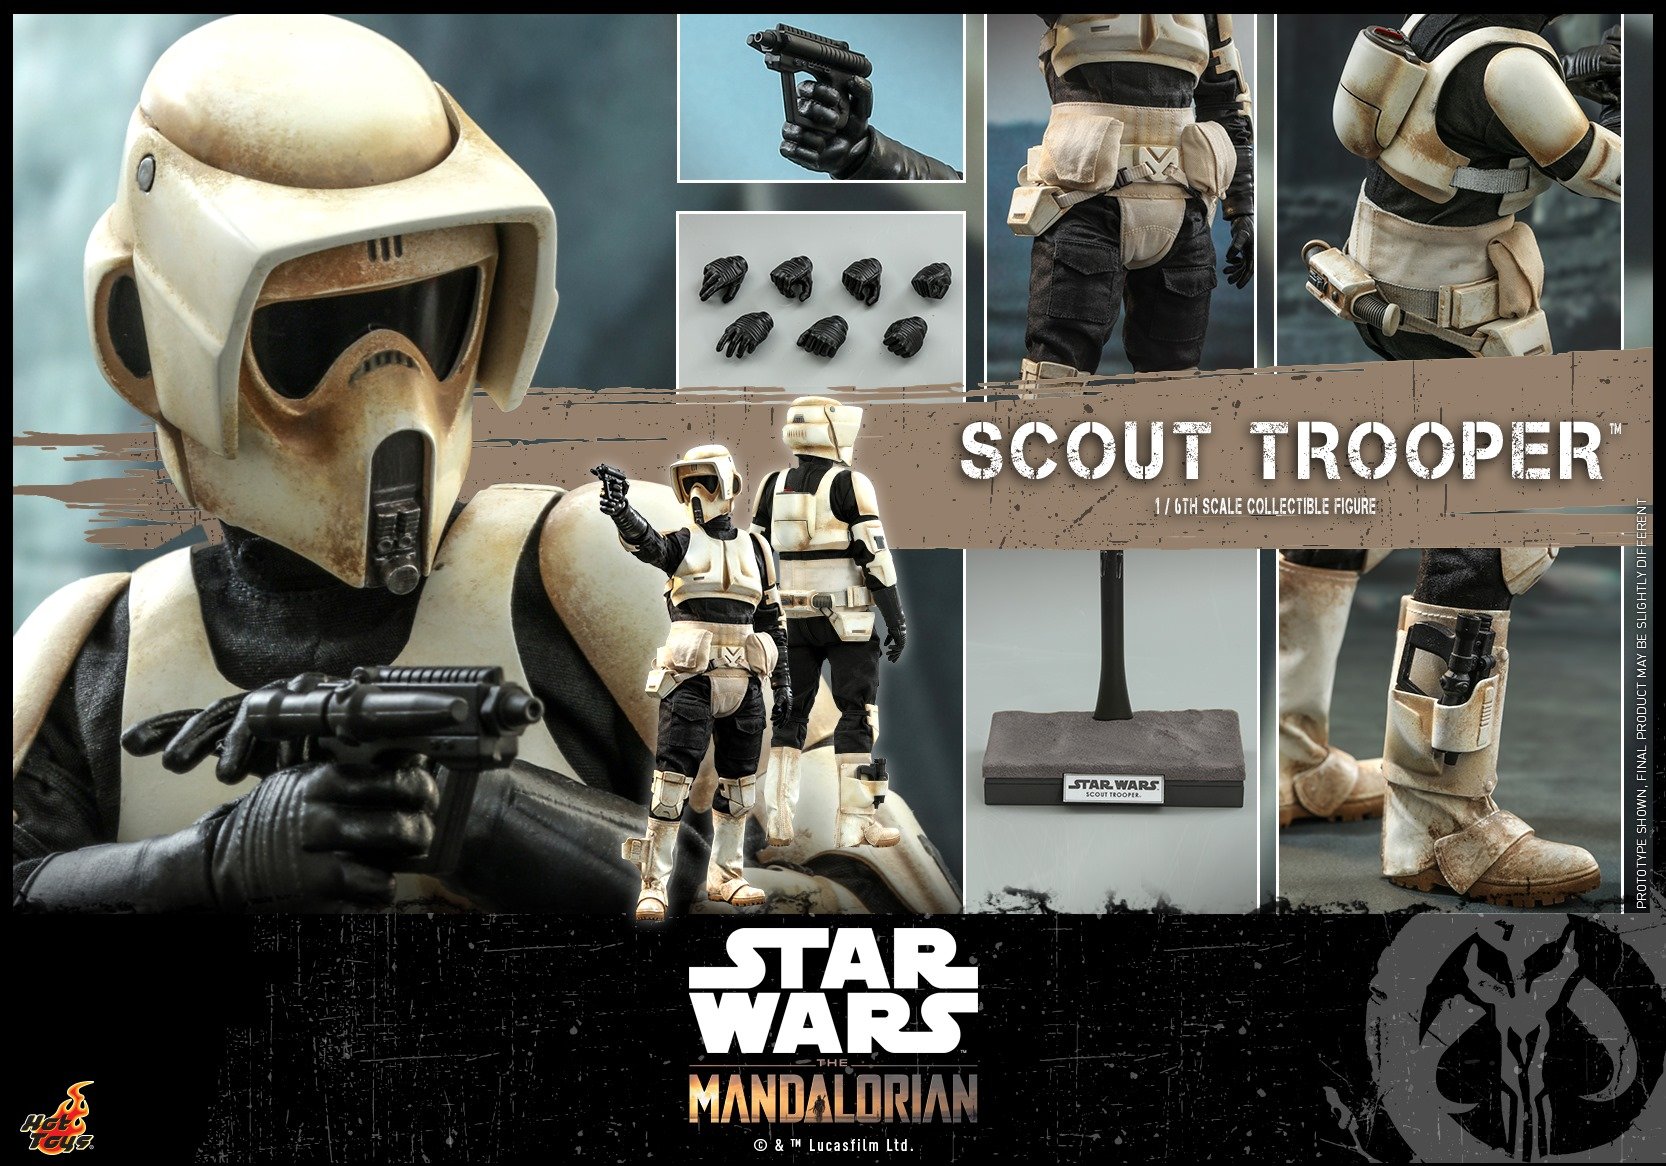 Hot-Toys-Scout-Trooper-008.jpg